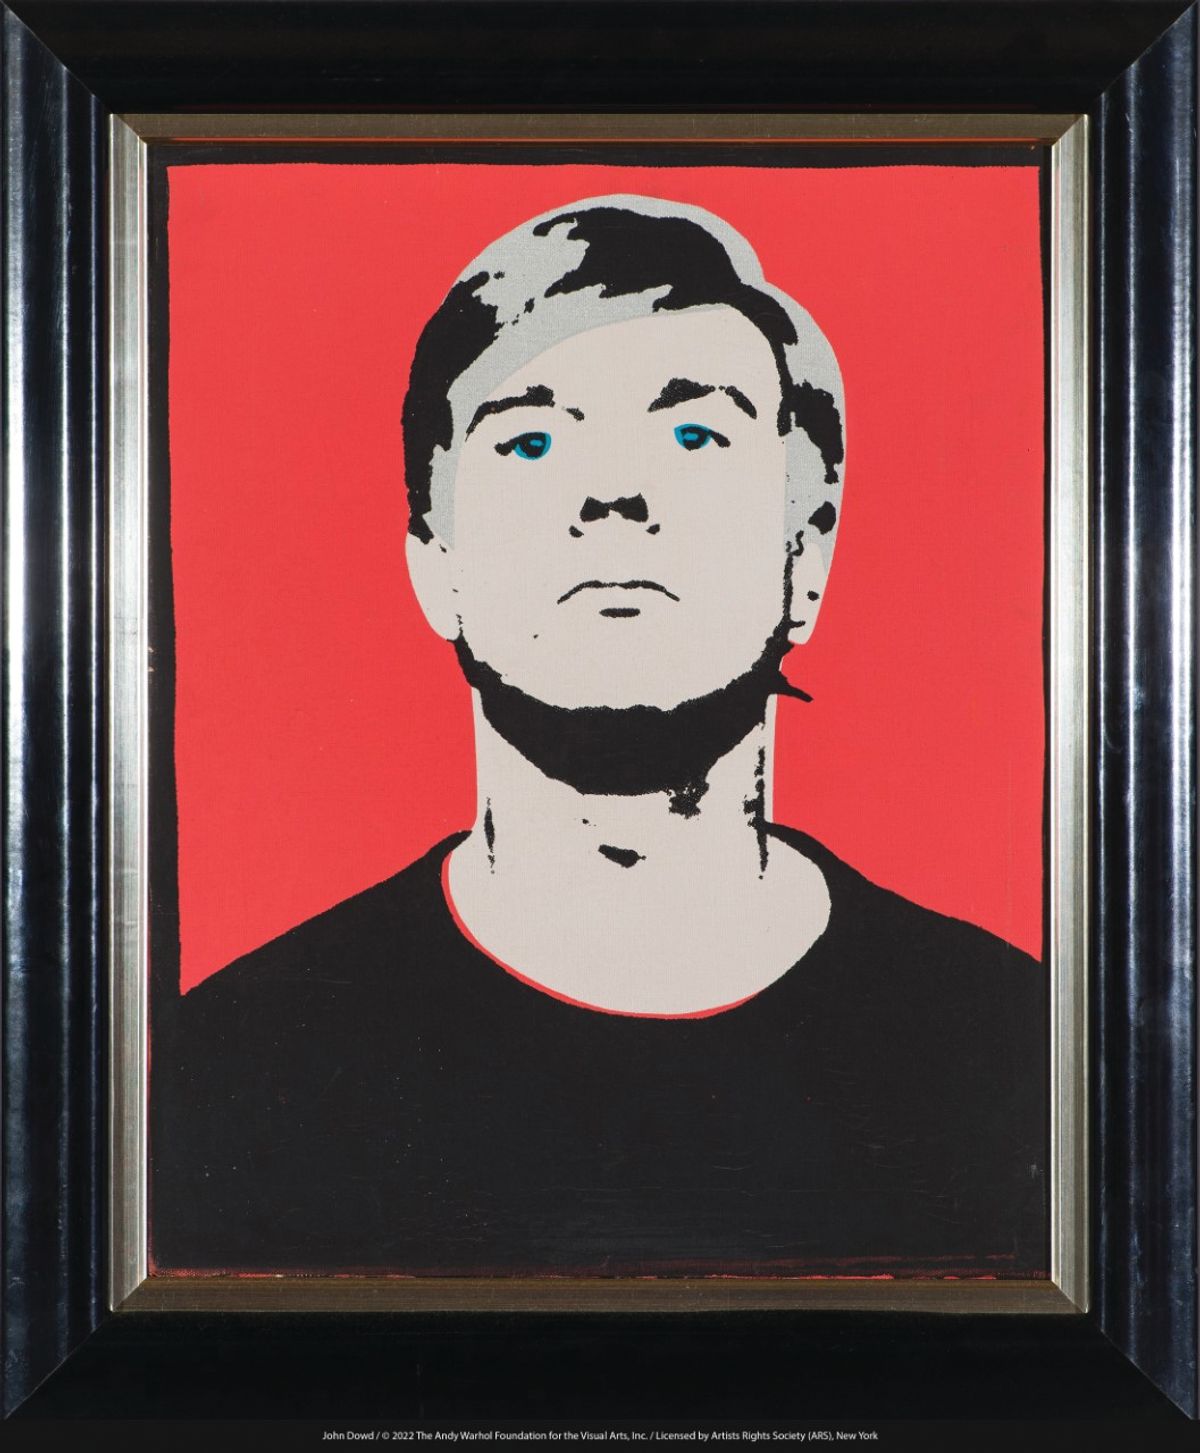 Andy Warhol's Self Portrait (Red) (1965)